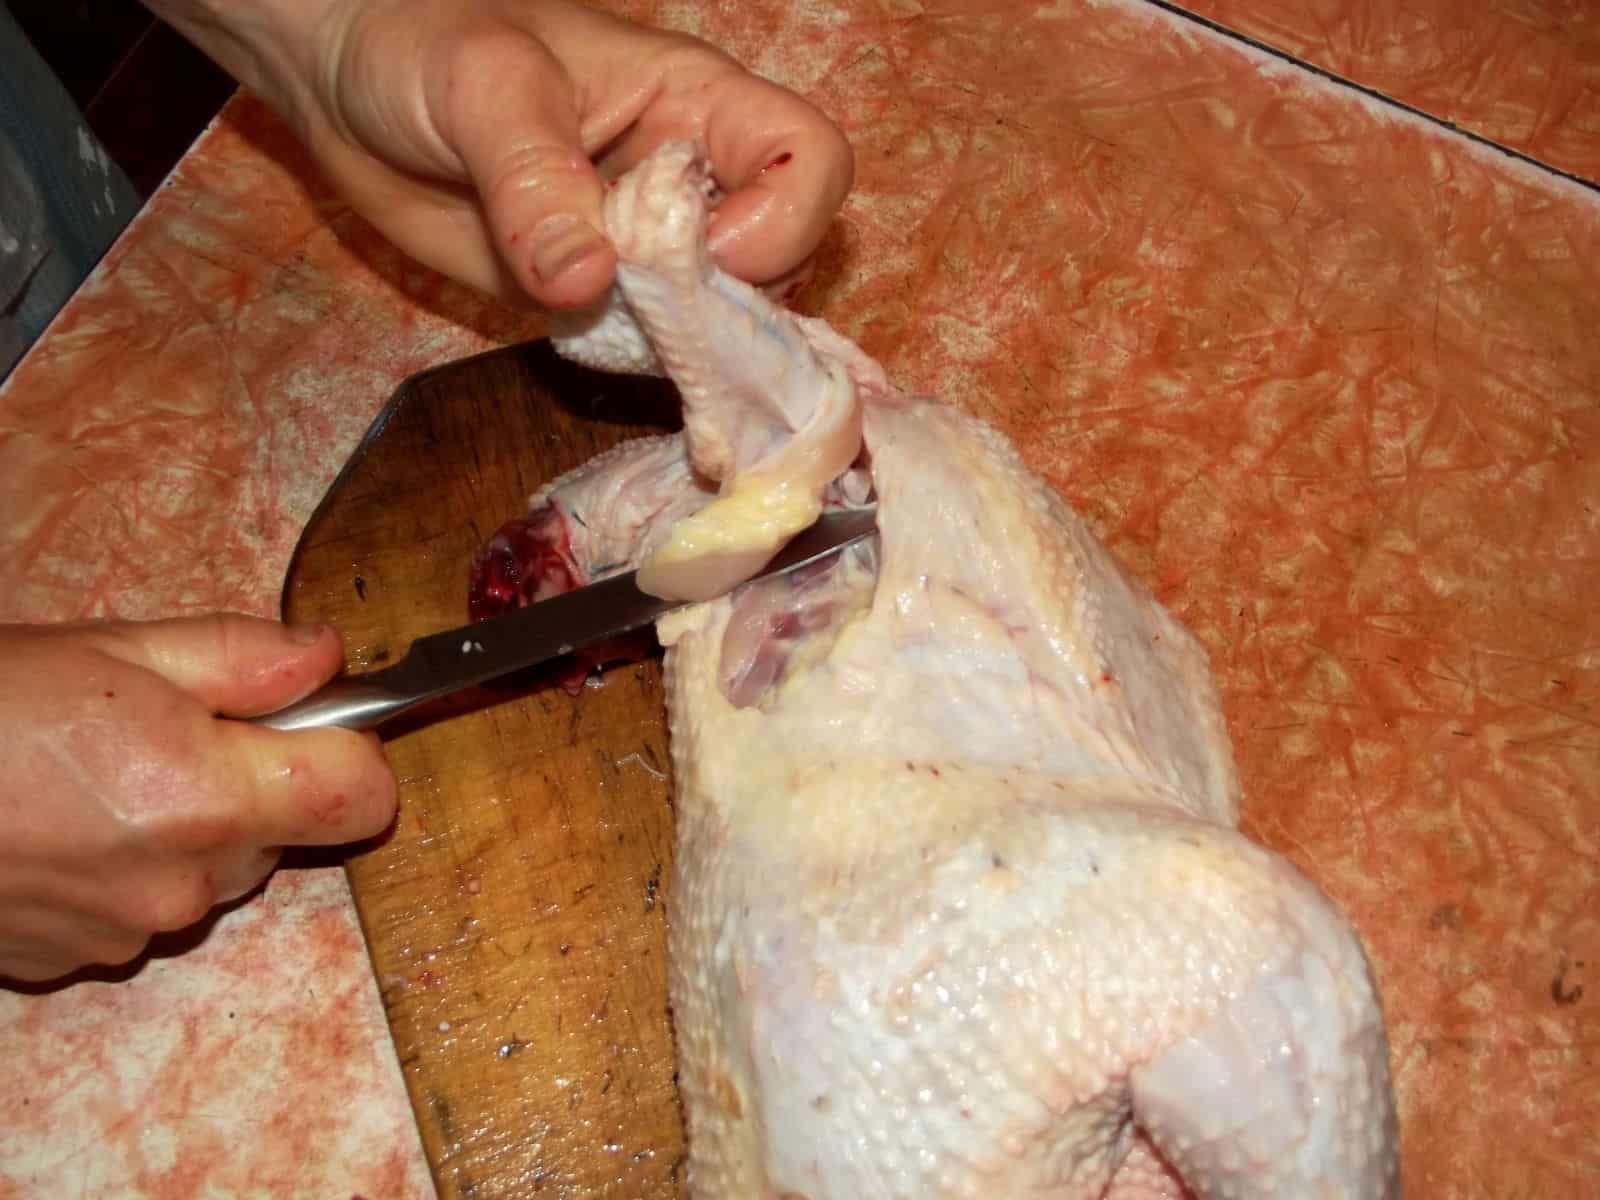 Lay the chick on its back, and cut around the wings, pulling the joint loose as you do.